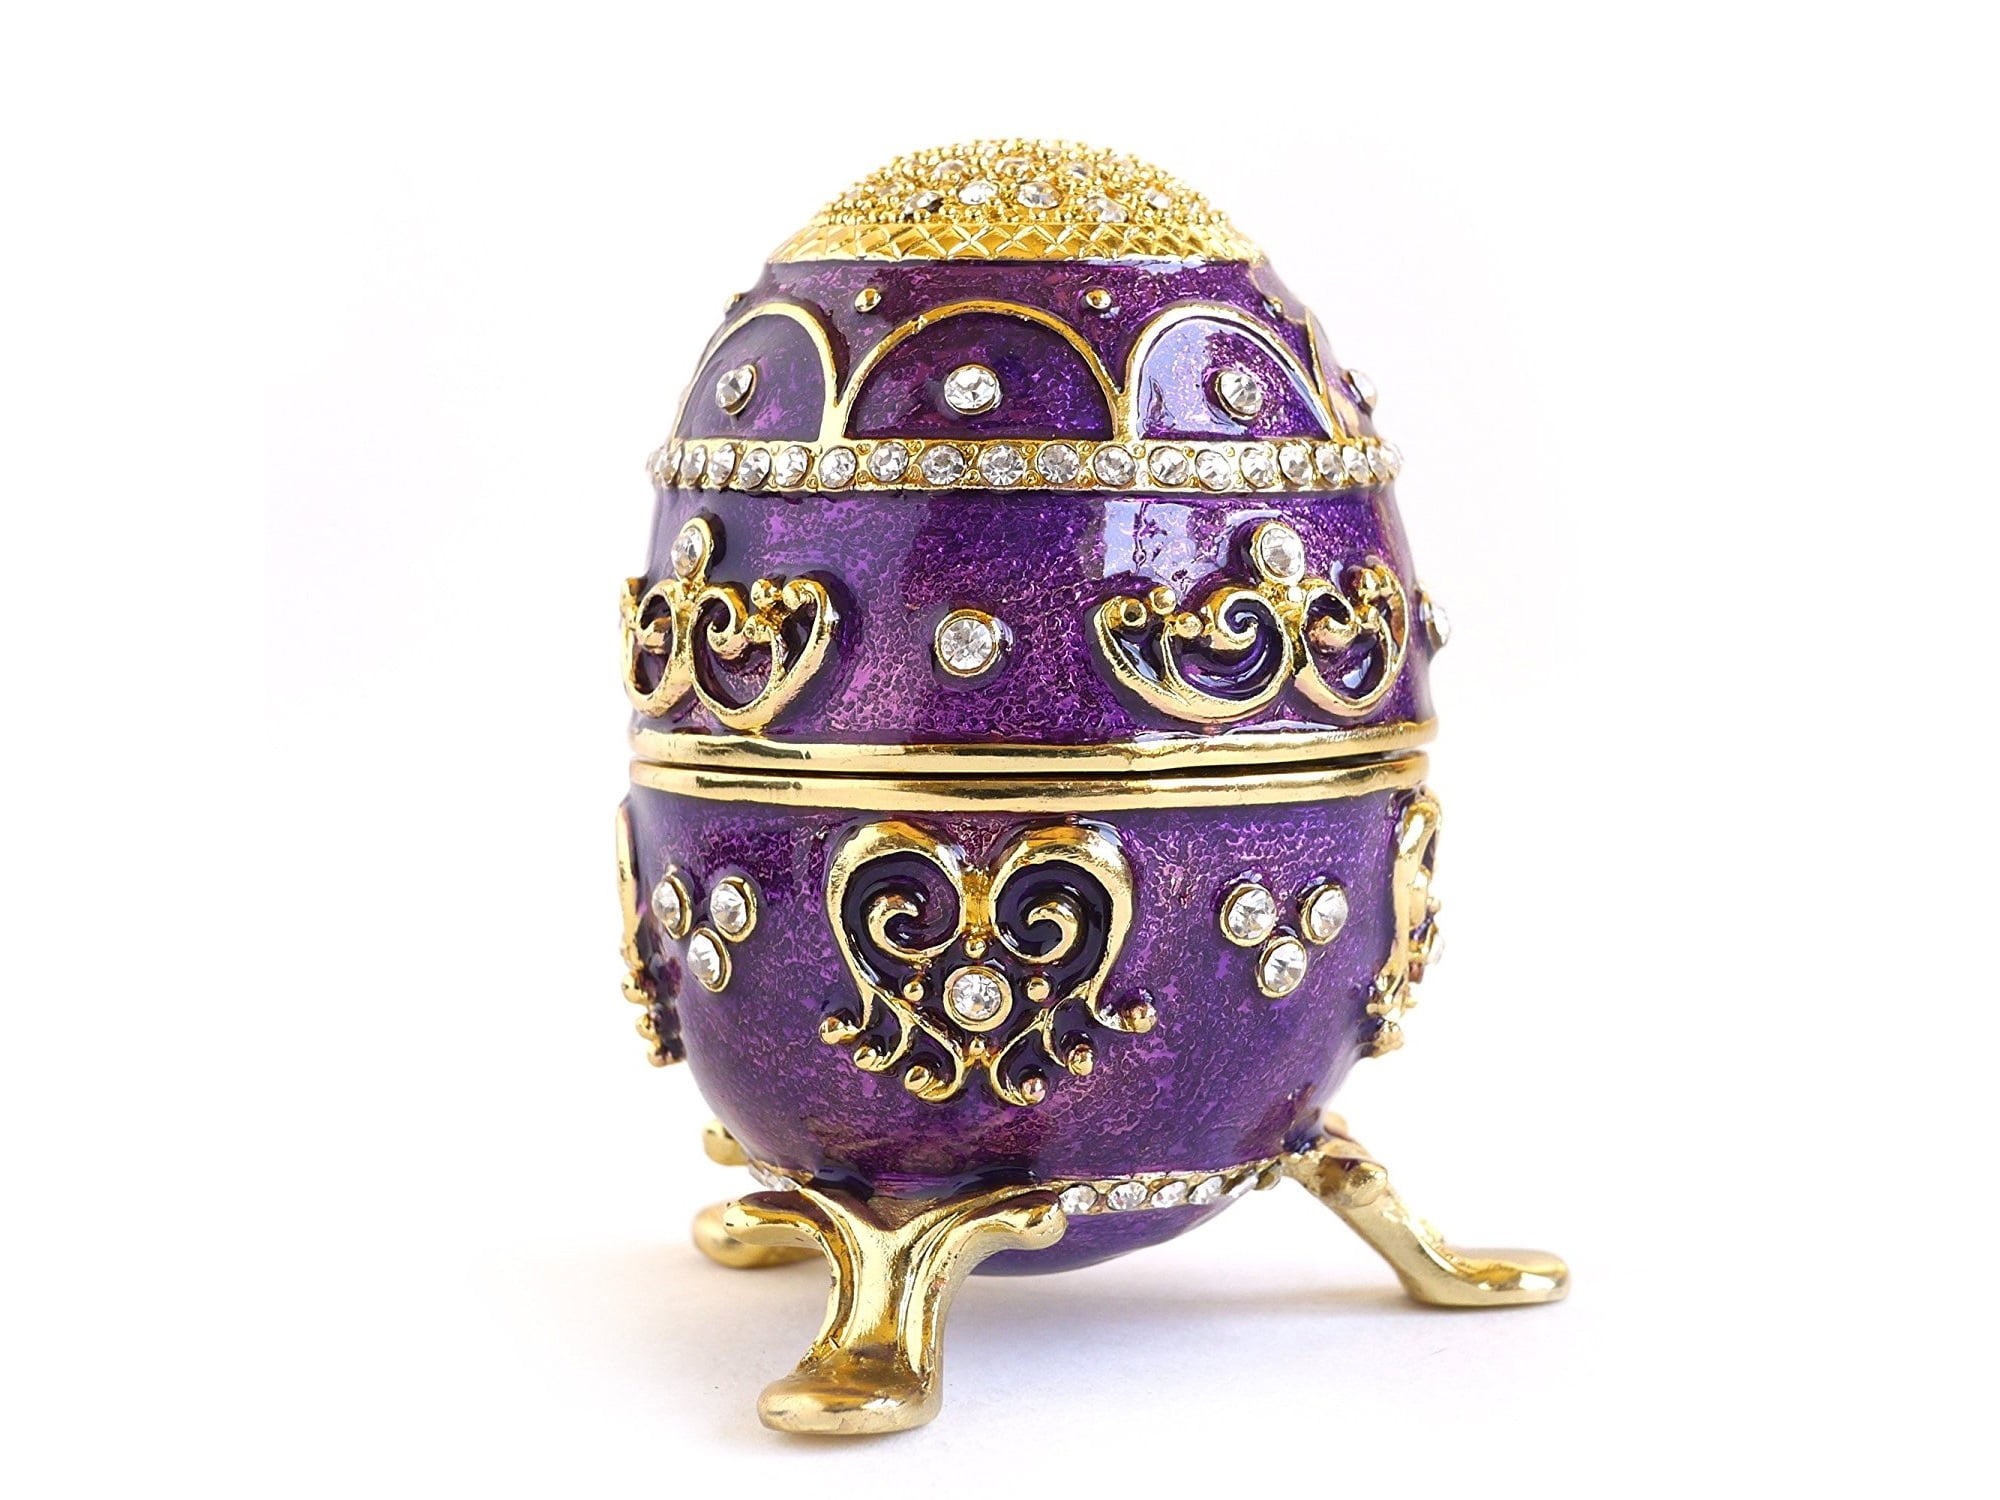 Happy Easter!, egg, purple, golden, faberge, white, card, white background